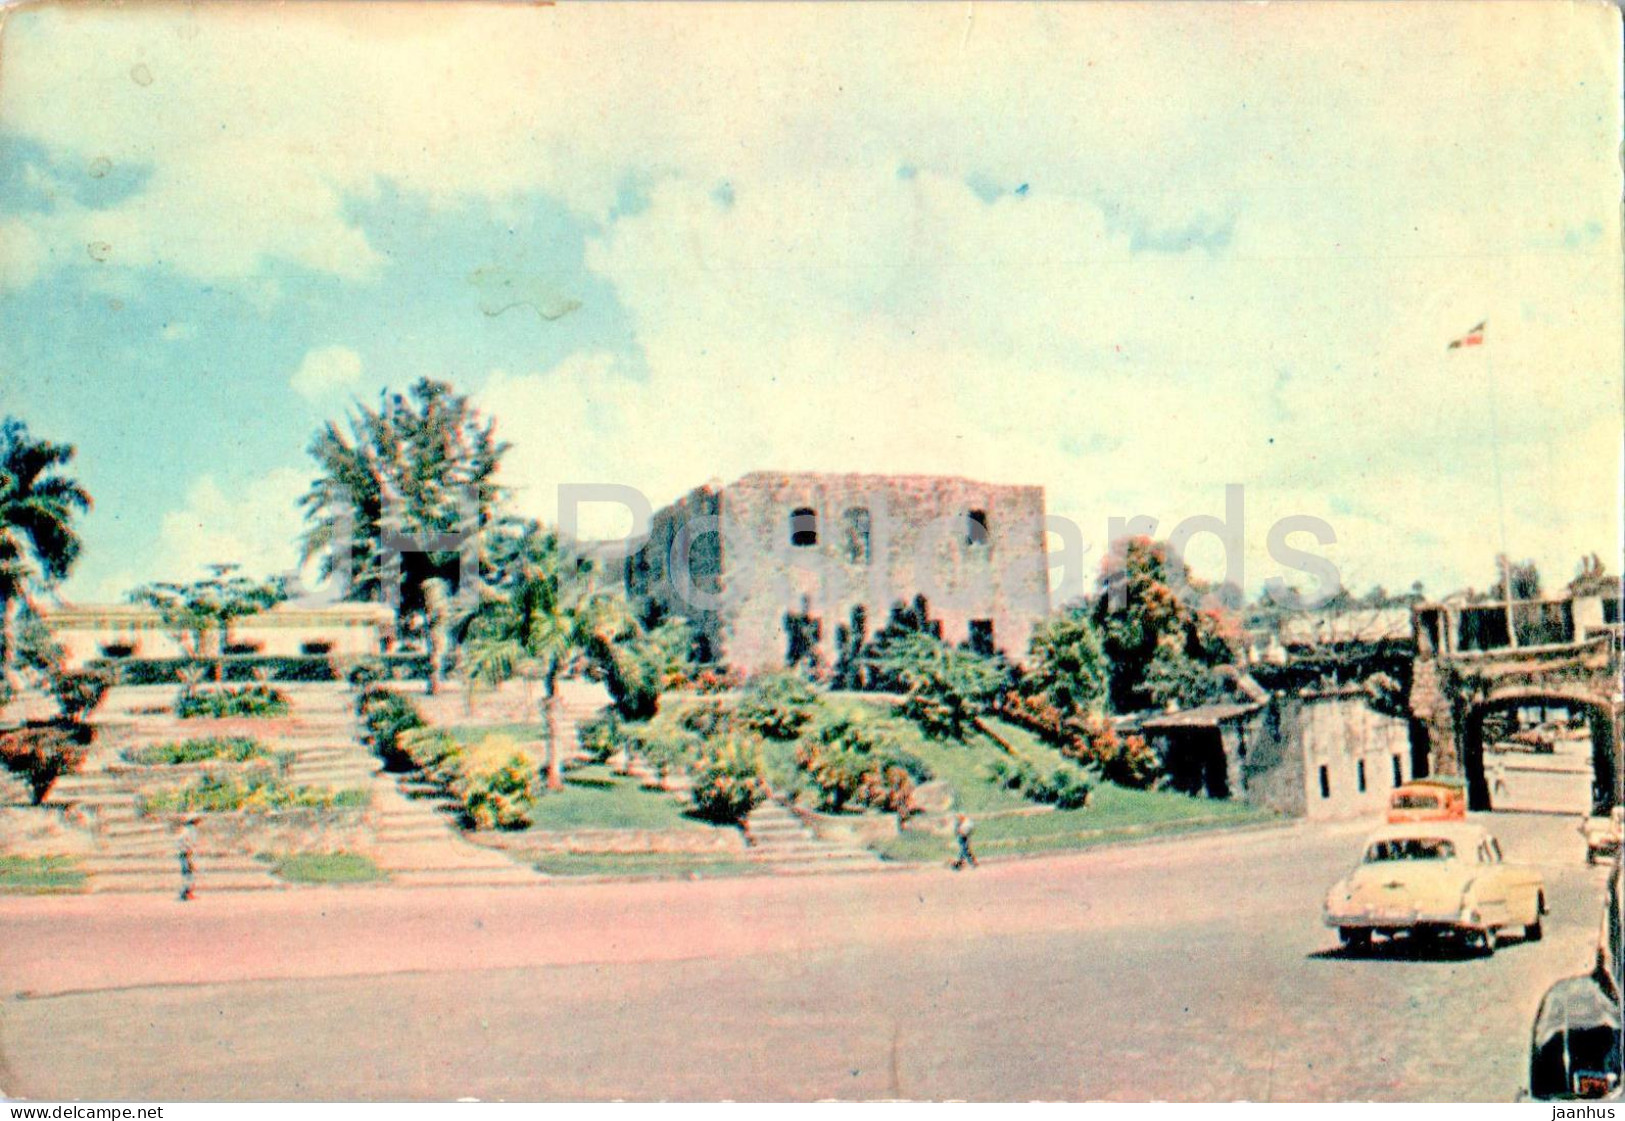 Christophe Colomb Aux Indes Occidentales - Plasmarine - Old Postcard - 1955 - Dominican Republic - Used - Dominican Republic